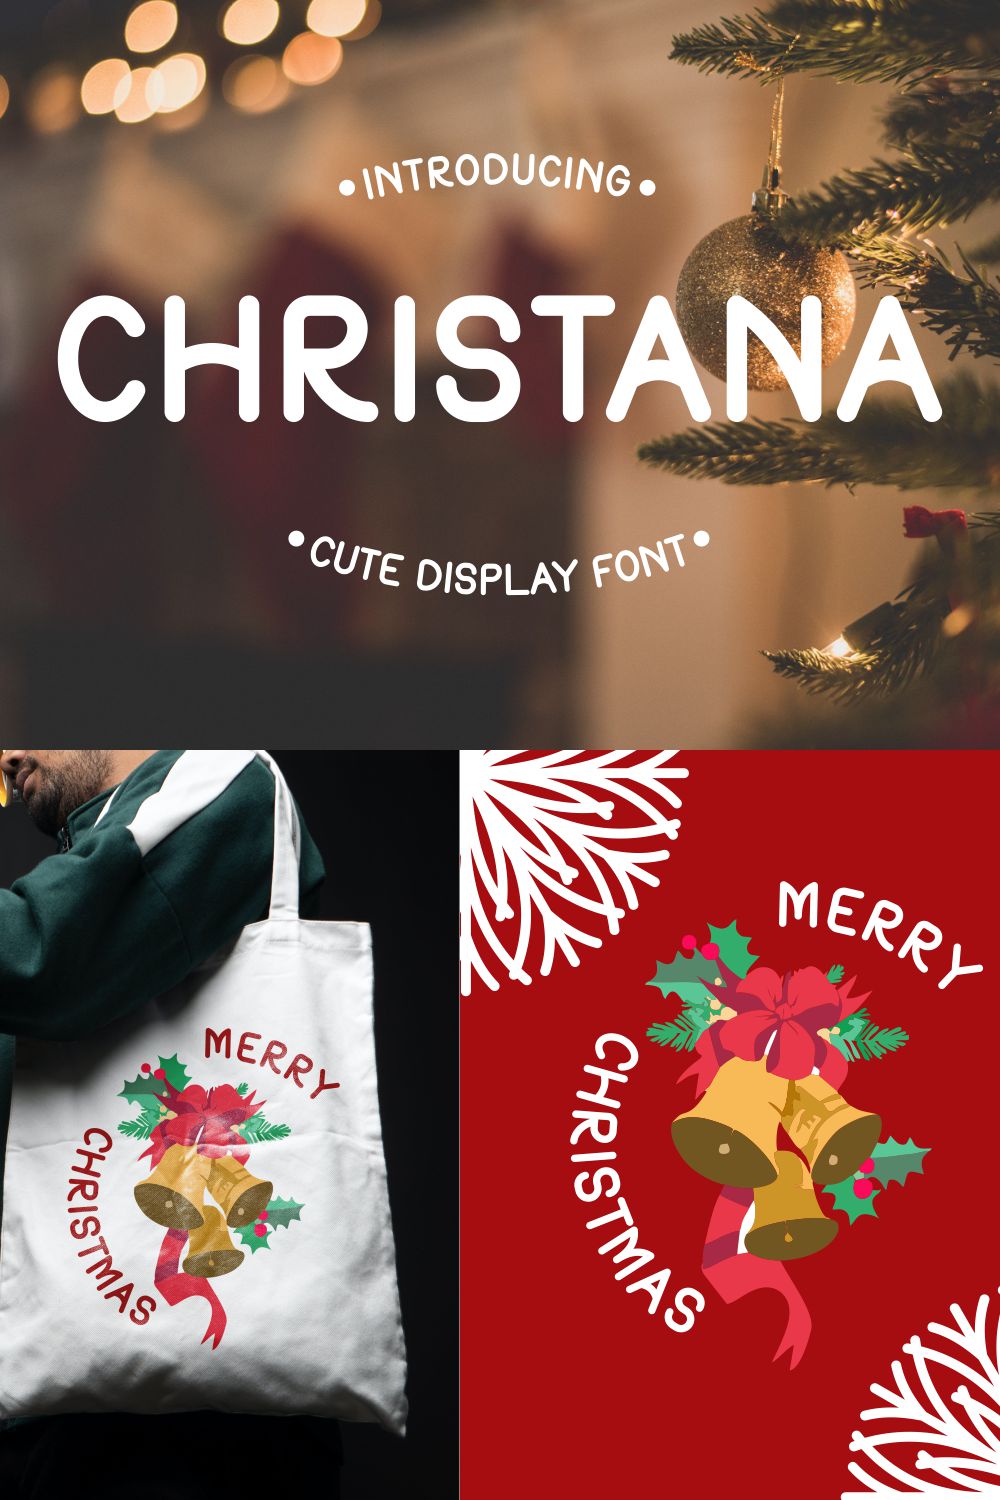 Christana - Cute Display Font pinterest preview image.